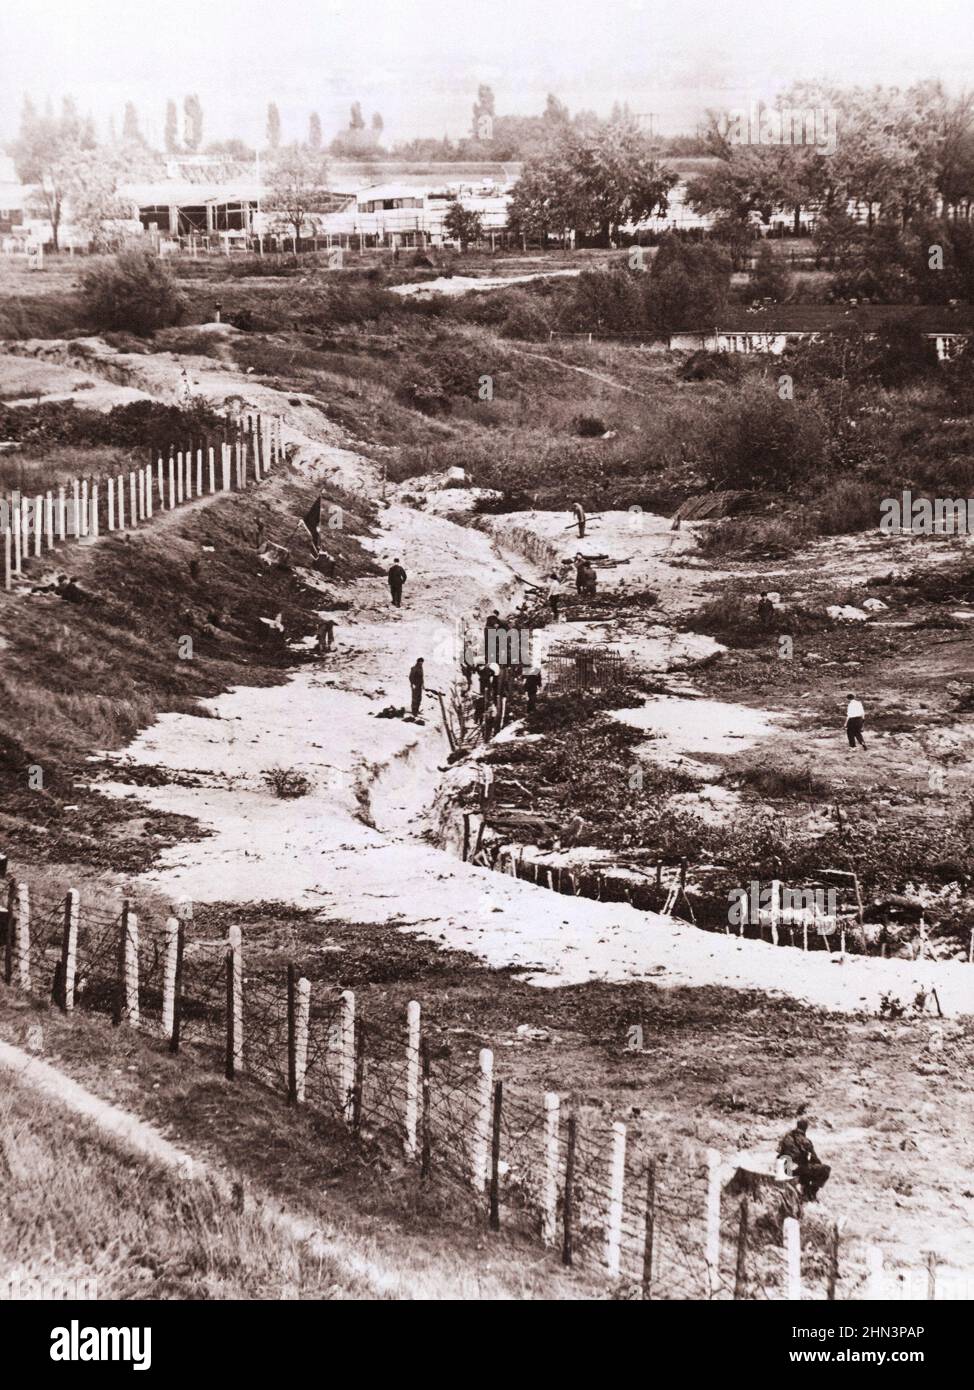 Vintage photo of Berlin Crisis of 1961: Building the Wall In A Final Attempt to Halt a Flood of Refugees Escaping from East Germany Through West Berli Stock Photo